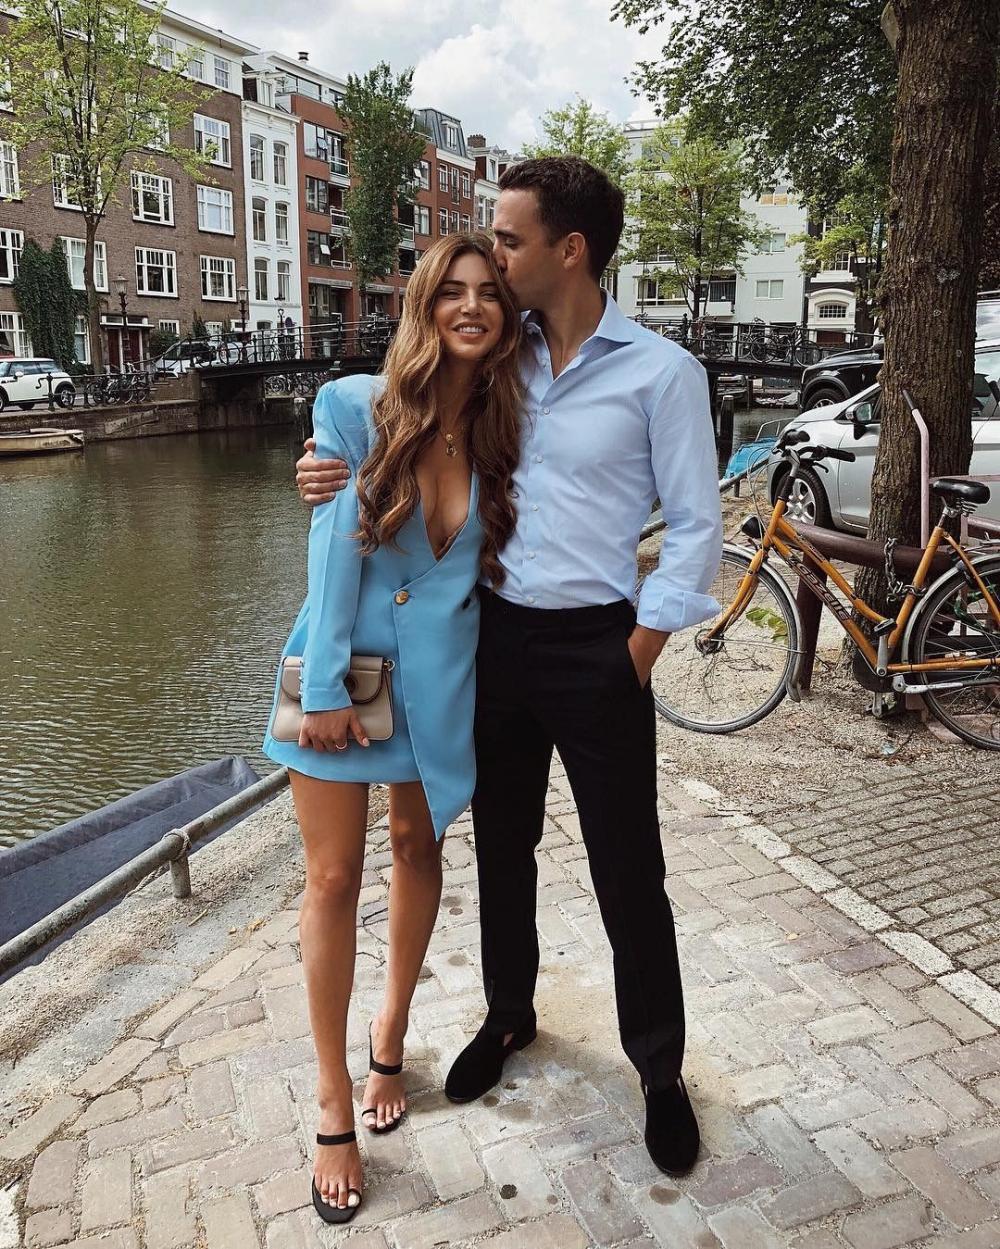 The best examples of perfectly dressed couples in the summer season